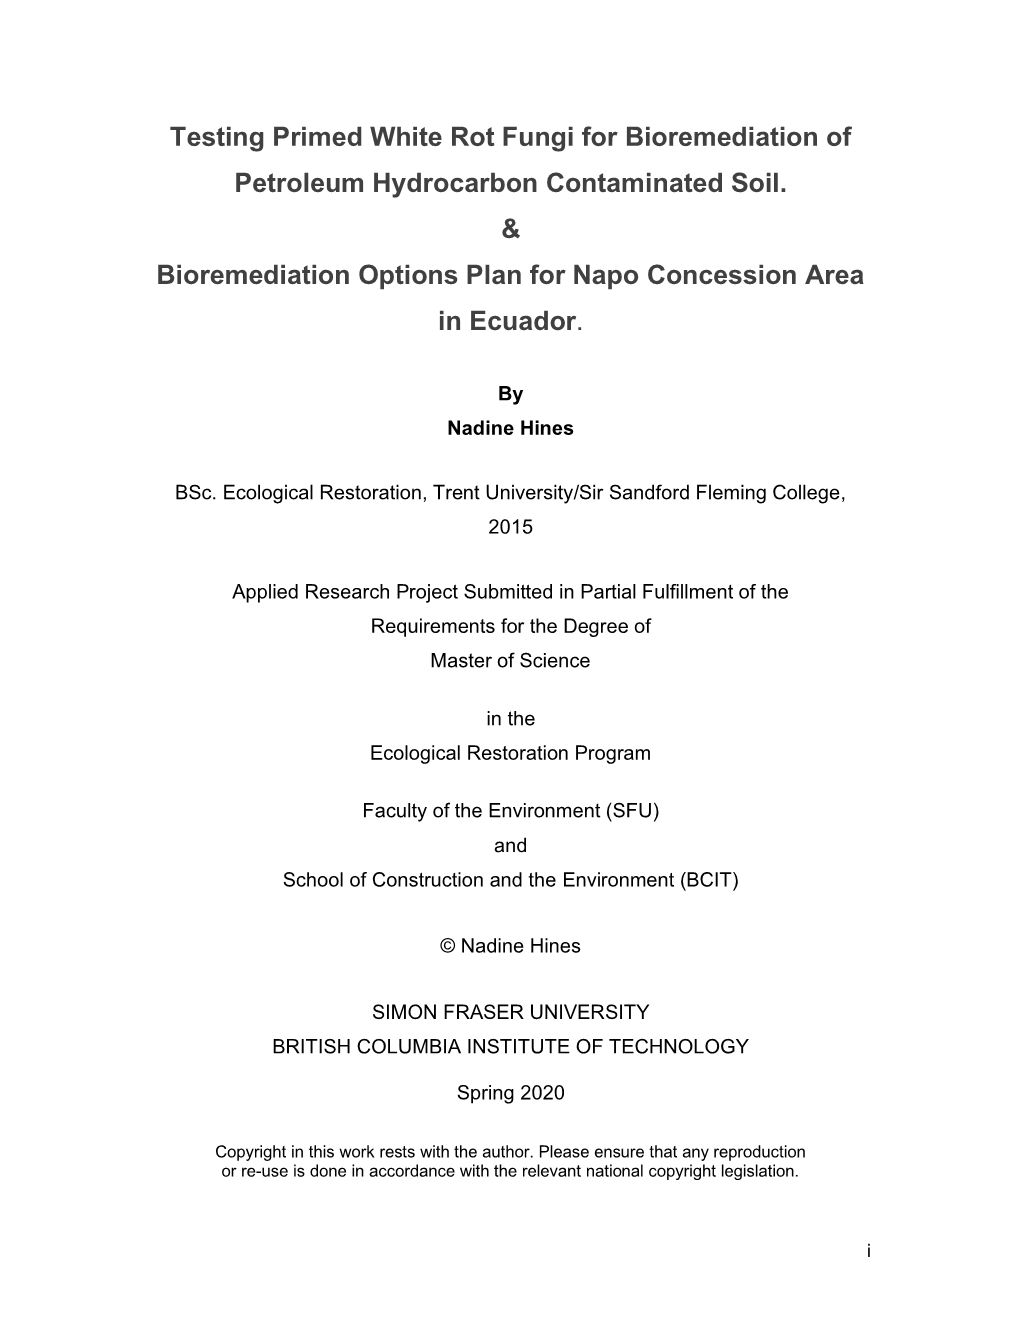 Testing Primed White Rot Fungi for Bioremediation of Petroleum Hydrocarbon Contaminated Soil